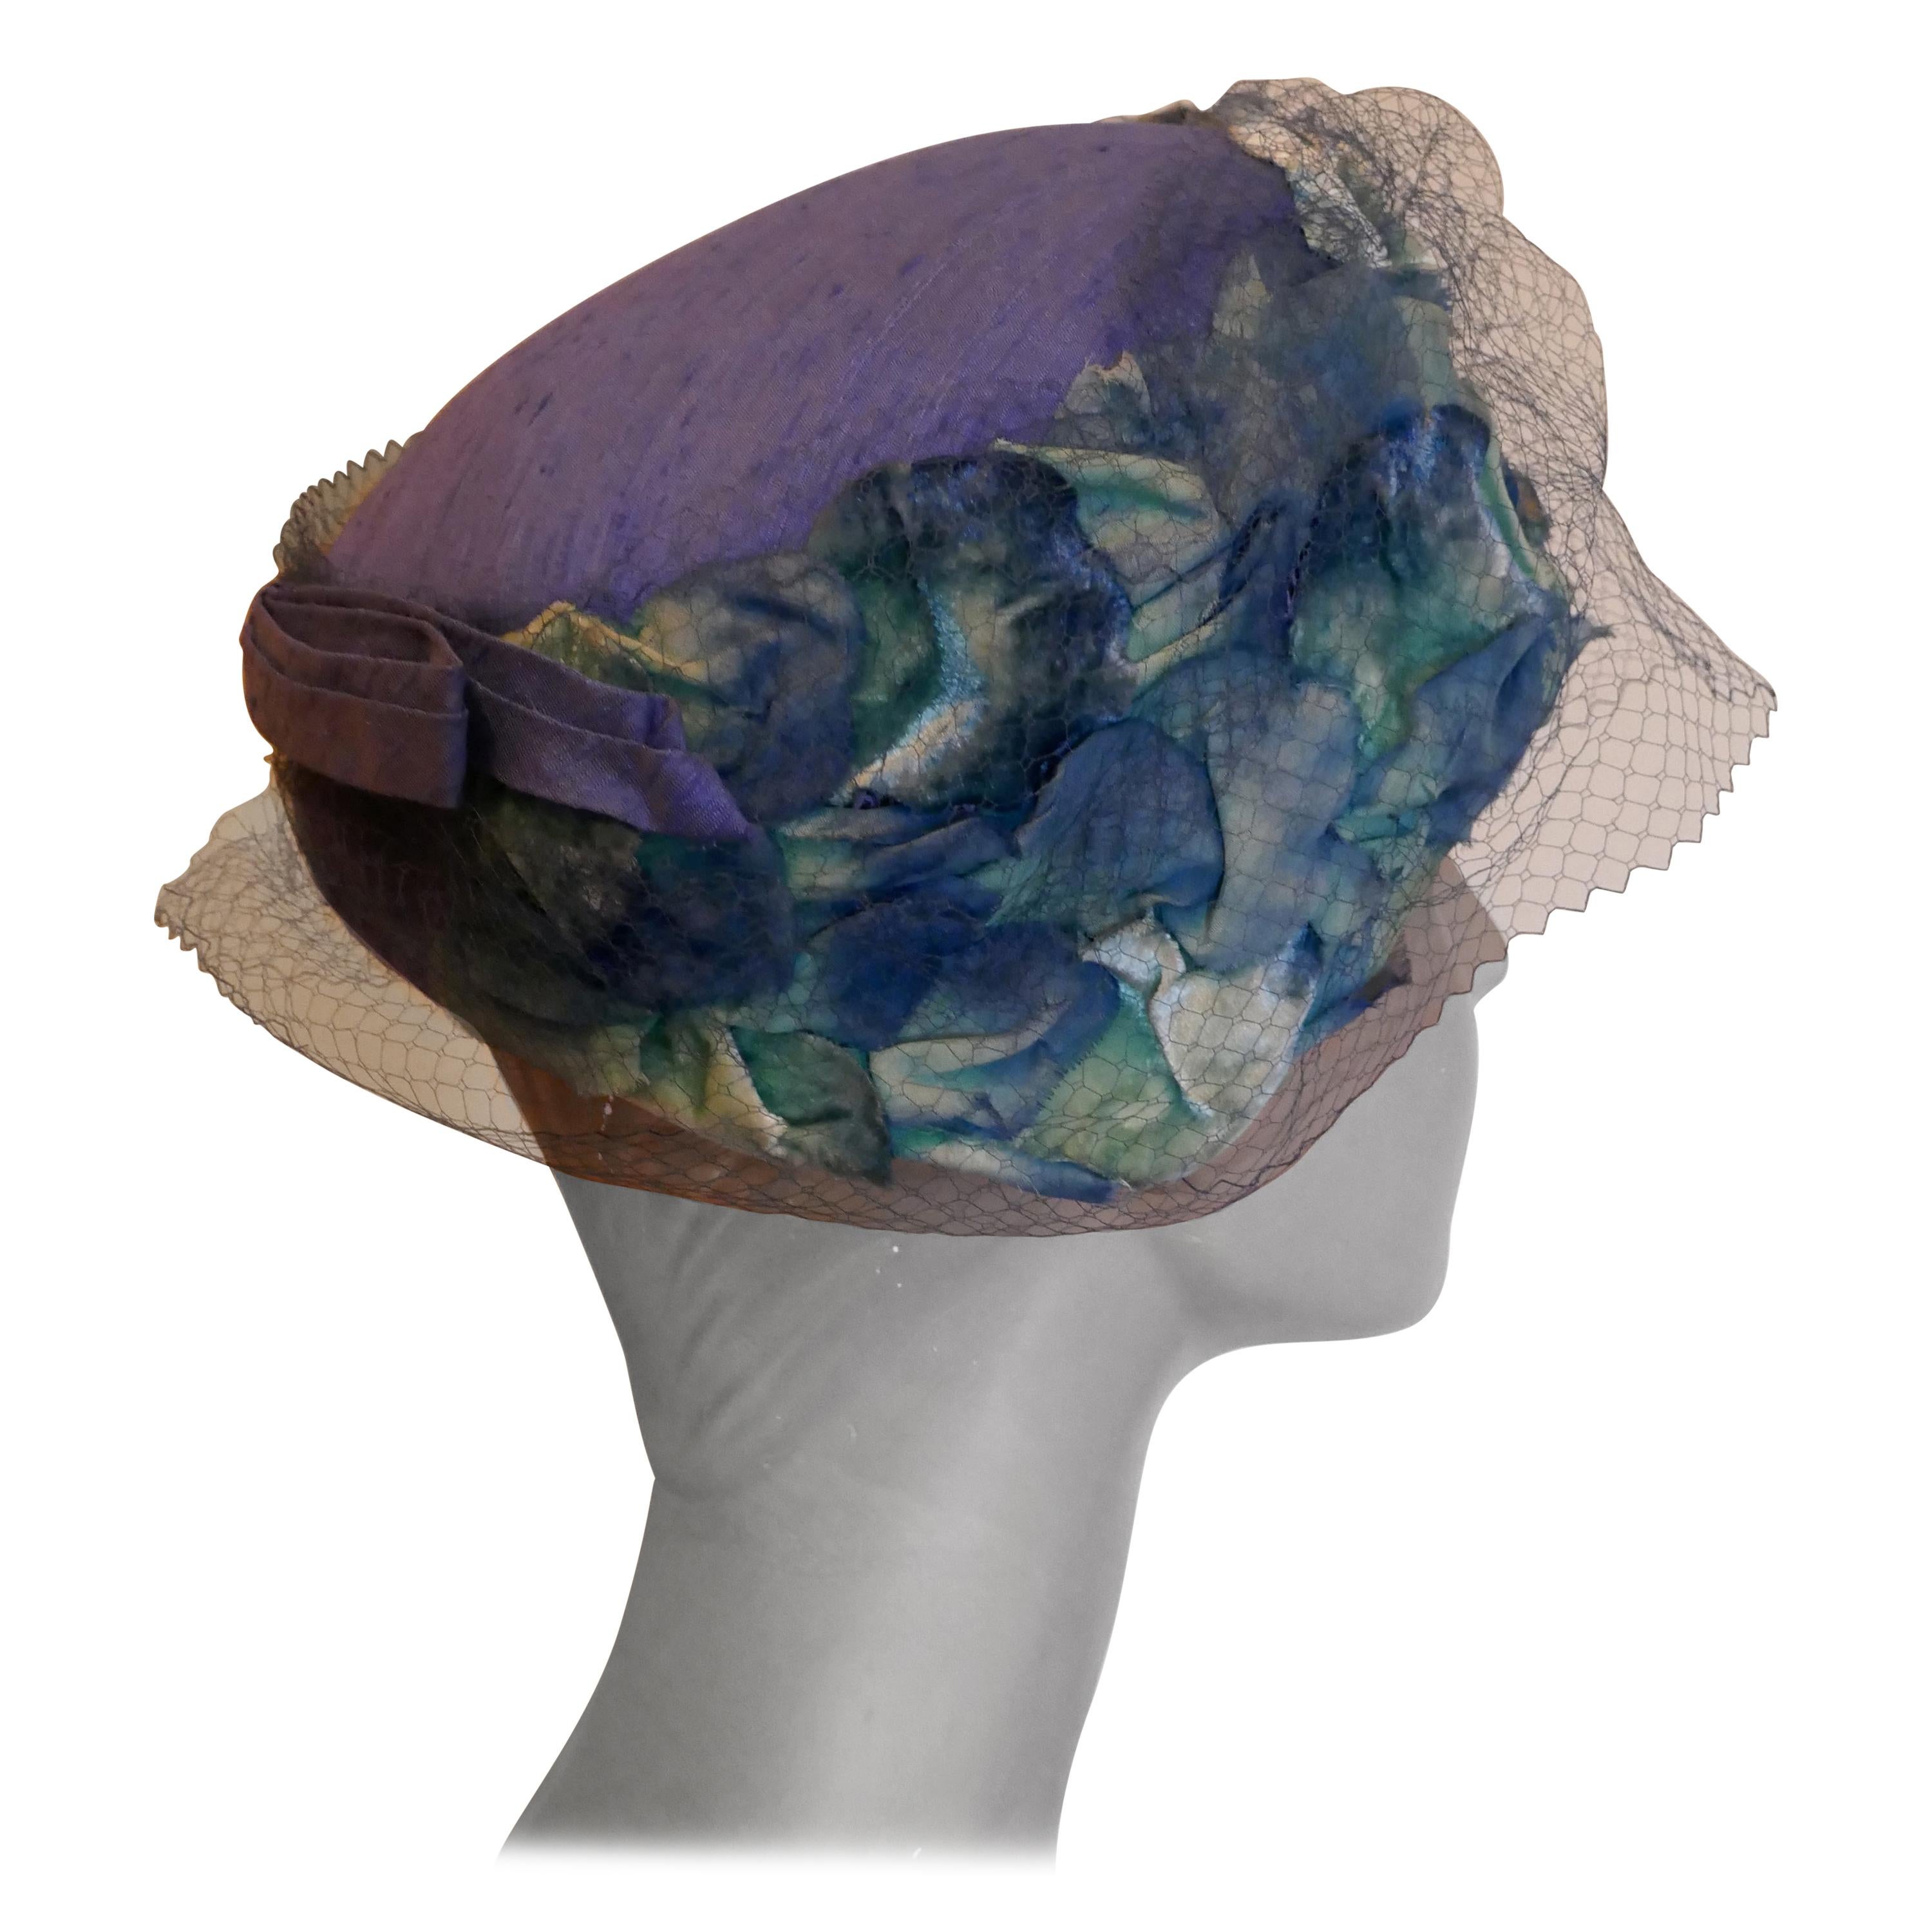 Original 1950s Blue Pill Box Hat, Decorated with Roses and Veil, by Connor